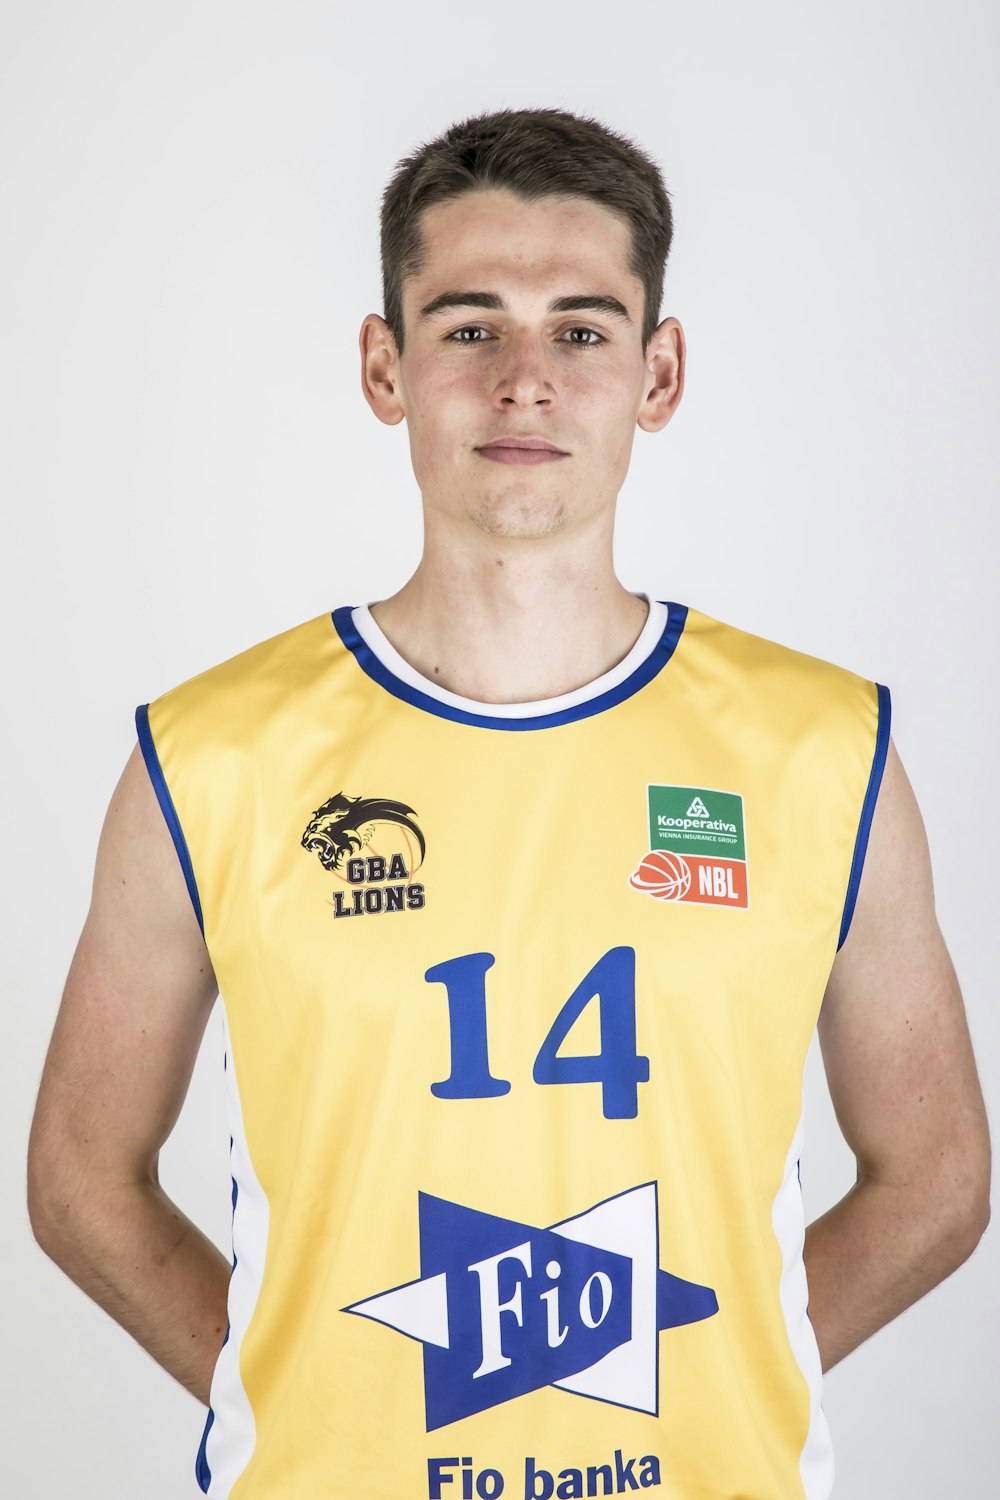 a young man in a yellow basketball uniform